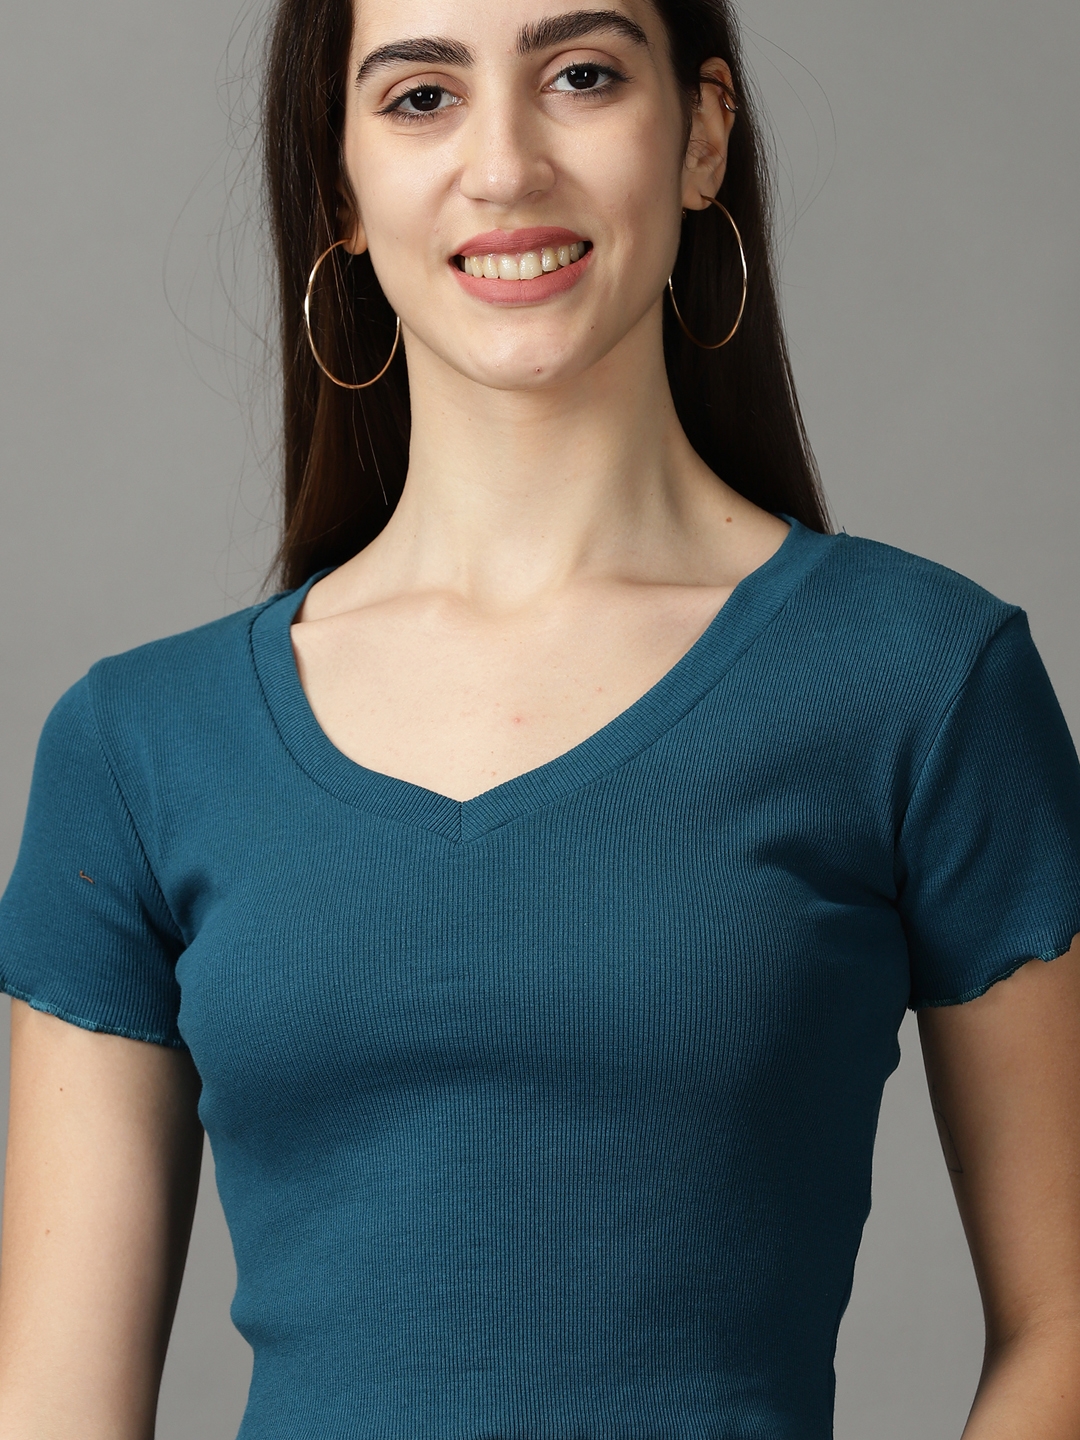 Women's Blue Polycotton Solid Tops